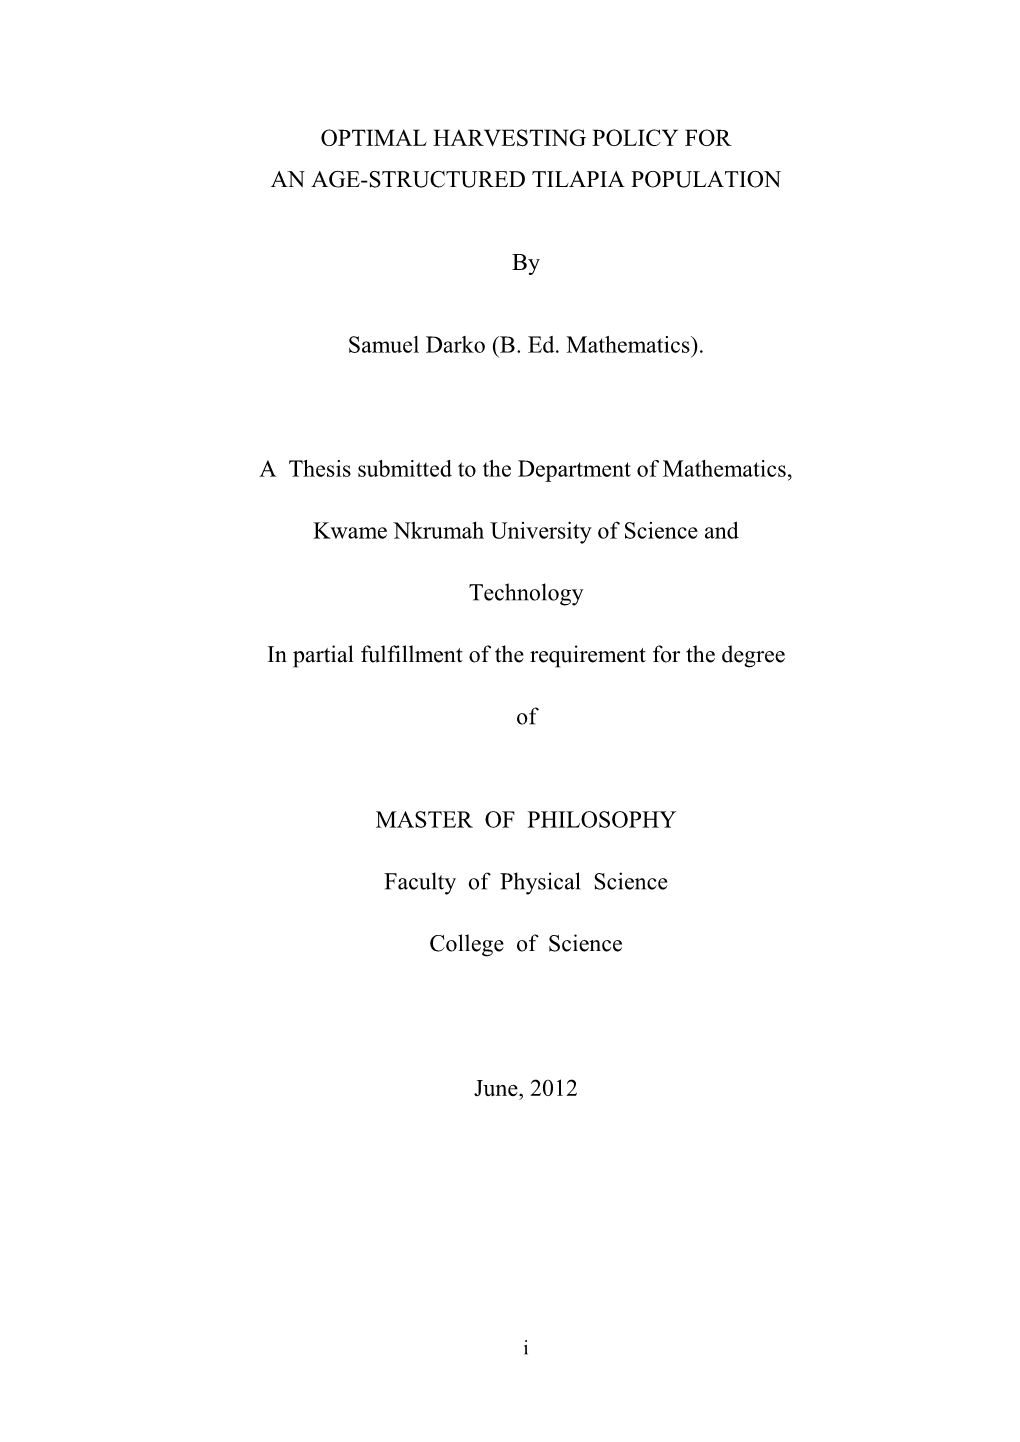 OPTIMAL HARVESTING POLICY for an AGE-STRUCTURED TILAPIA POPULATION by Samuel Darko (B. Ed. Mathematics). a Thesis Submitted To